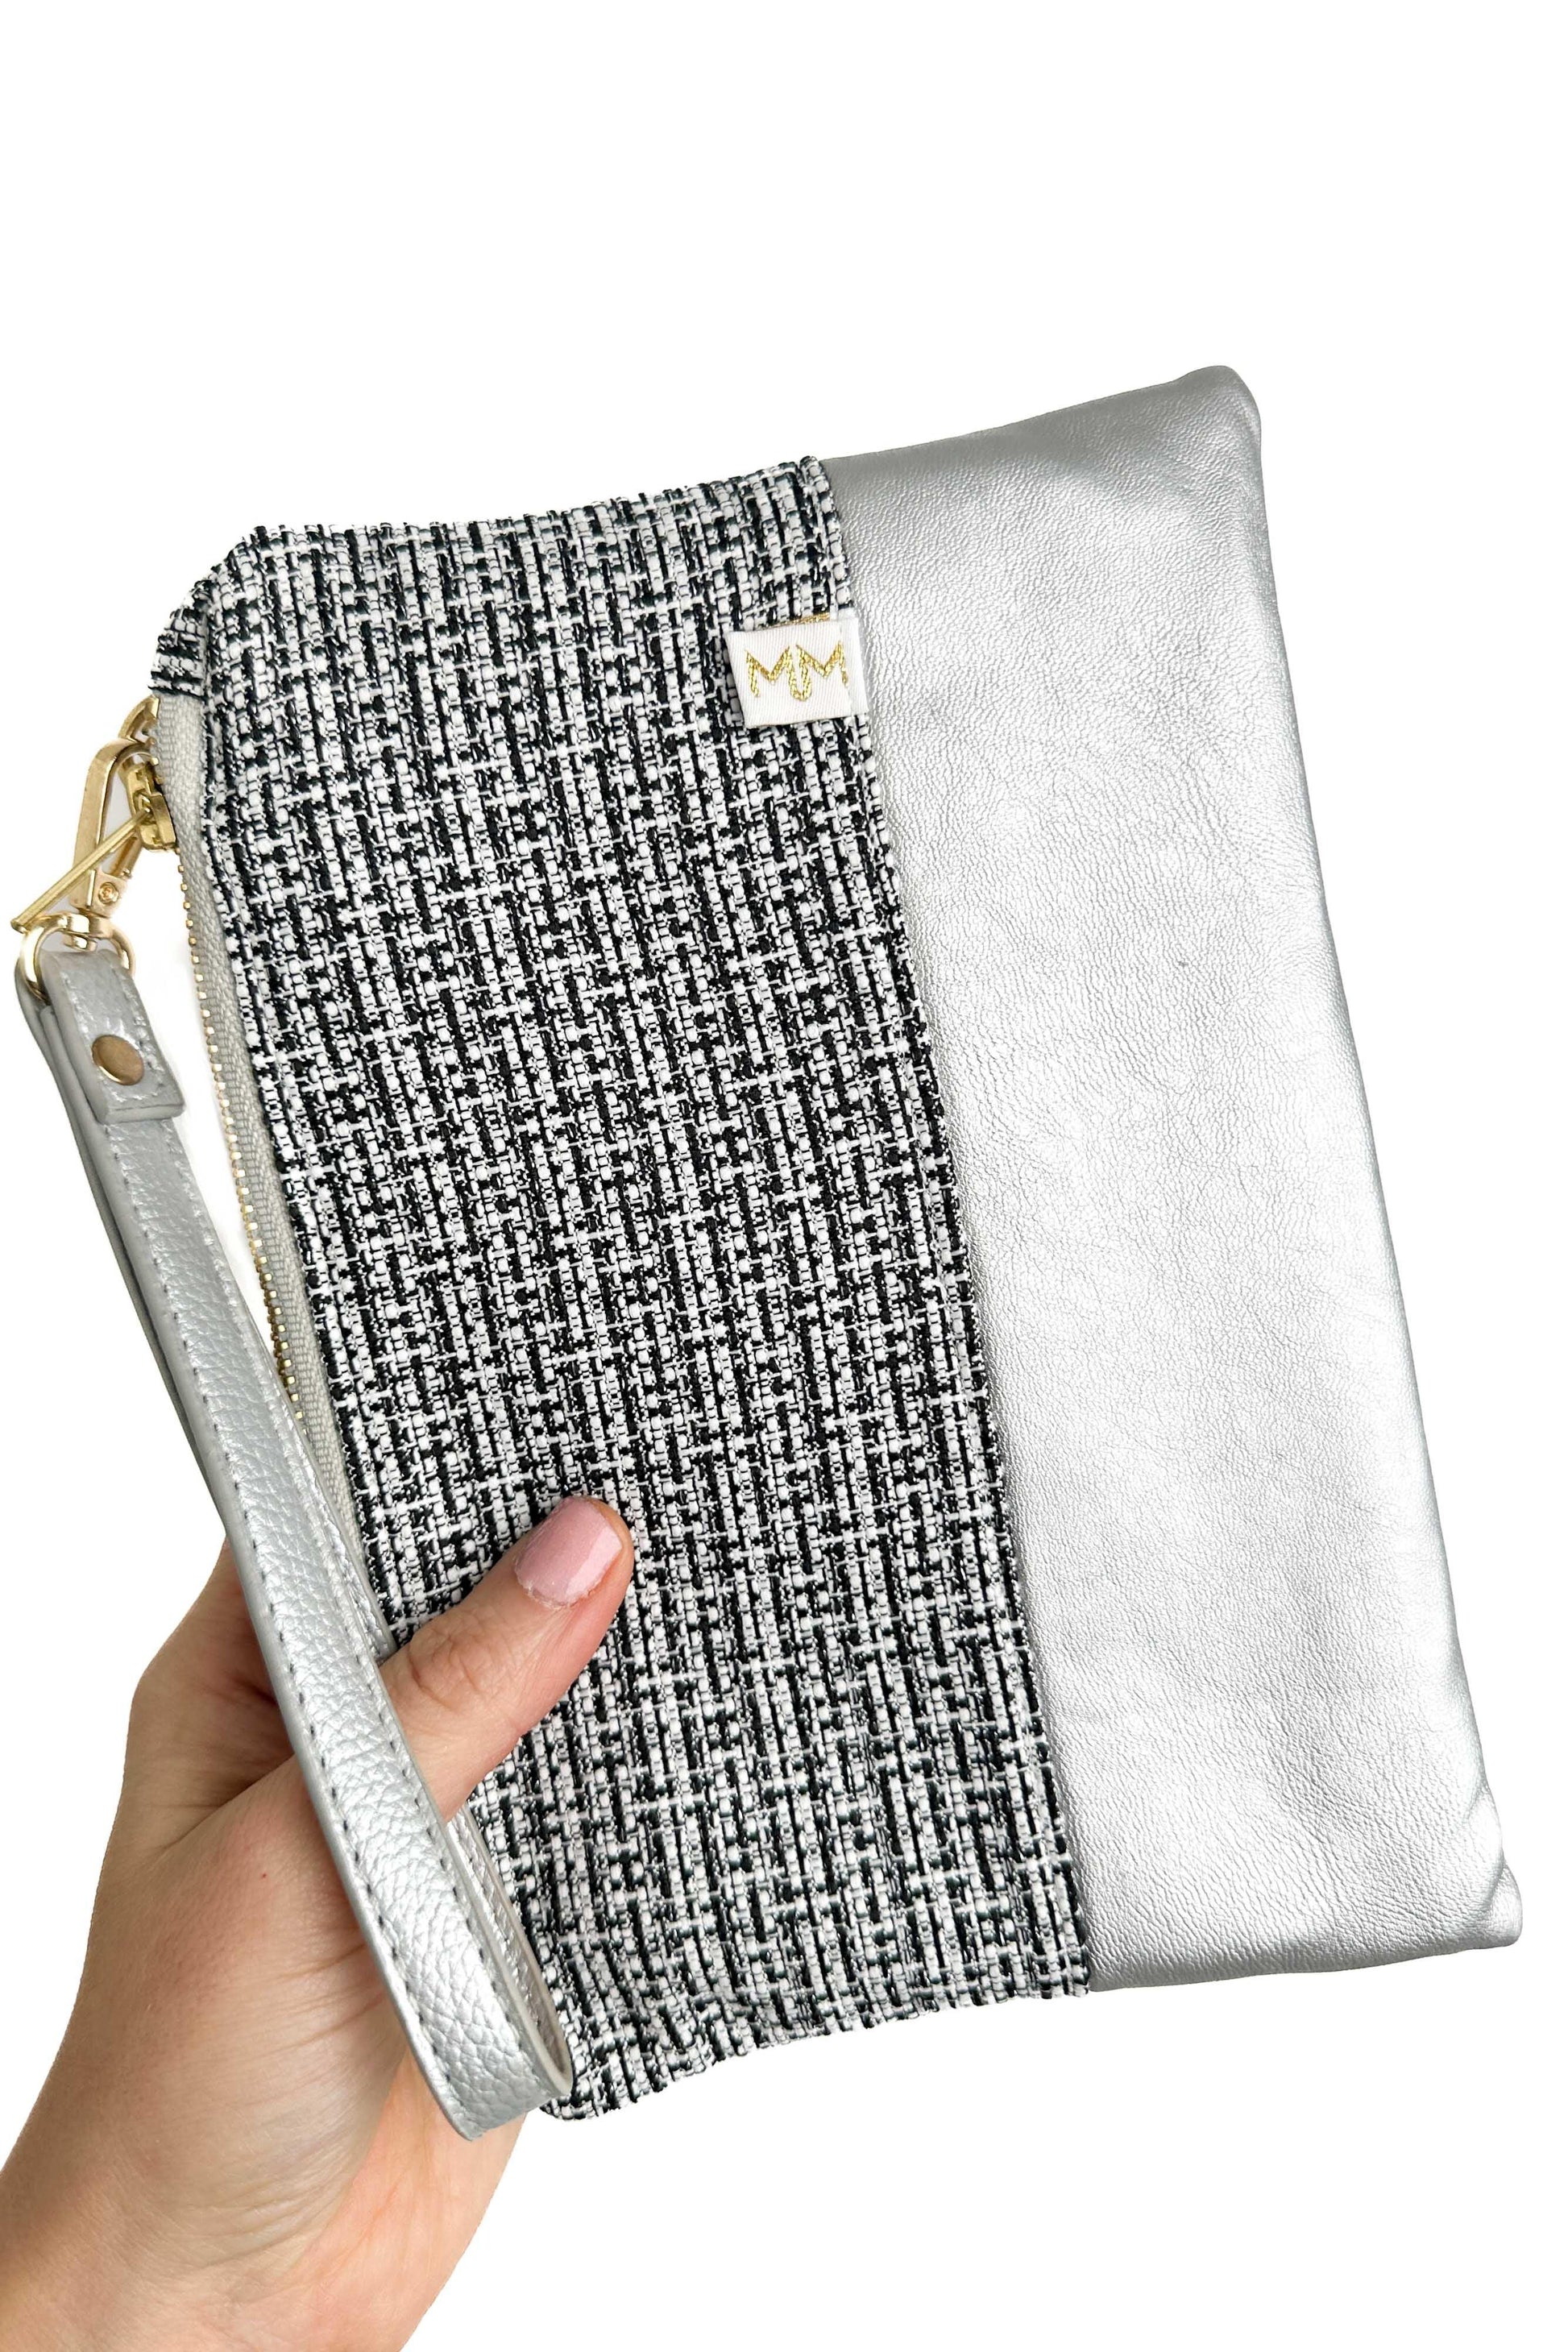 Silver Woven Convertible Crossbody Wristlet+ with Compartments READY TO SHIP - Modern Makerie